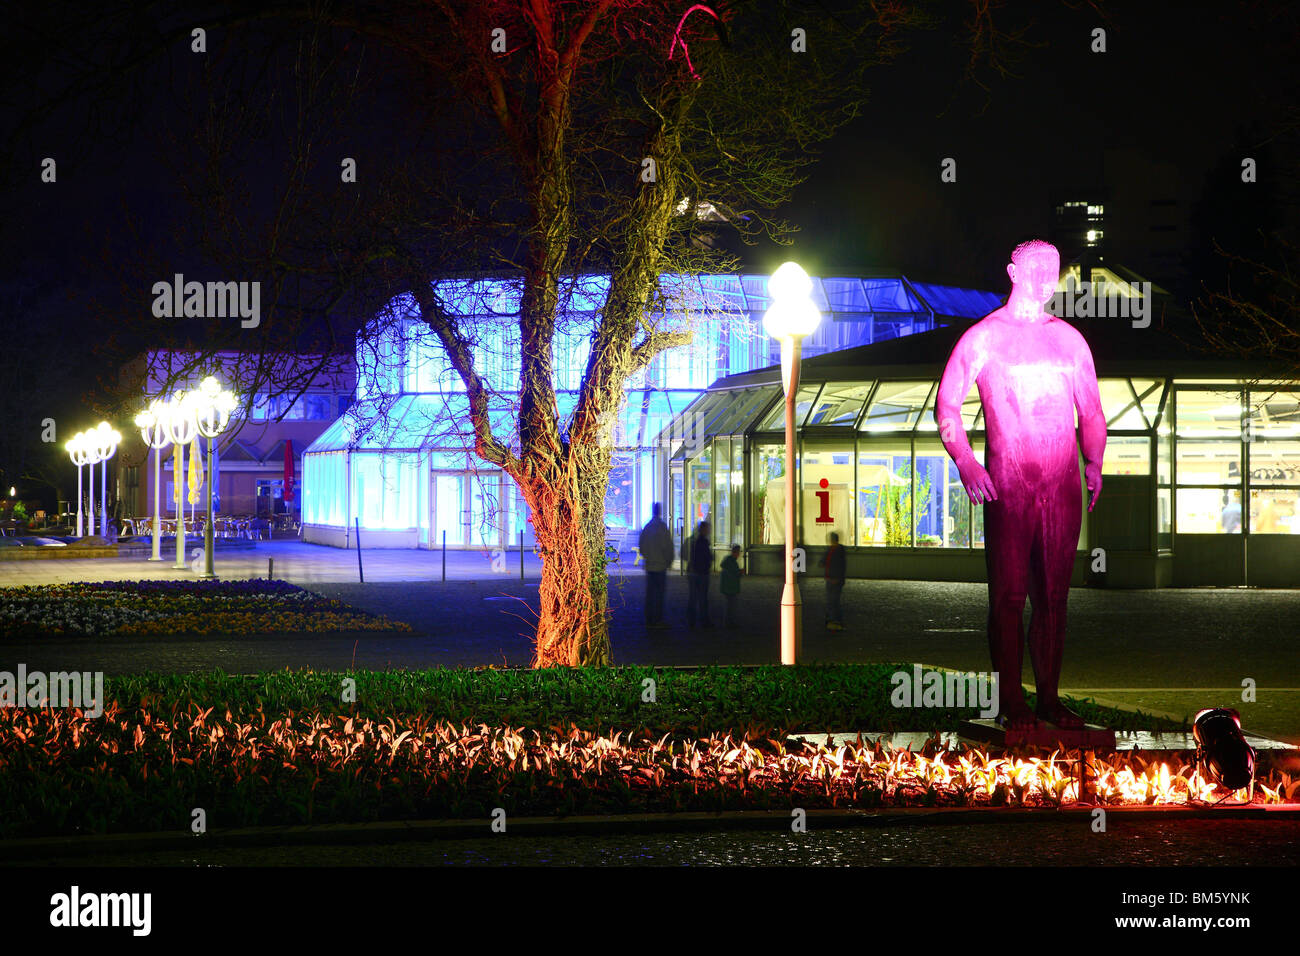 artificial Light installation at the Gruga Park Essen, Germany. Stock Photo